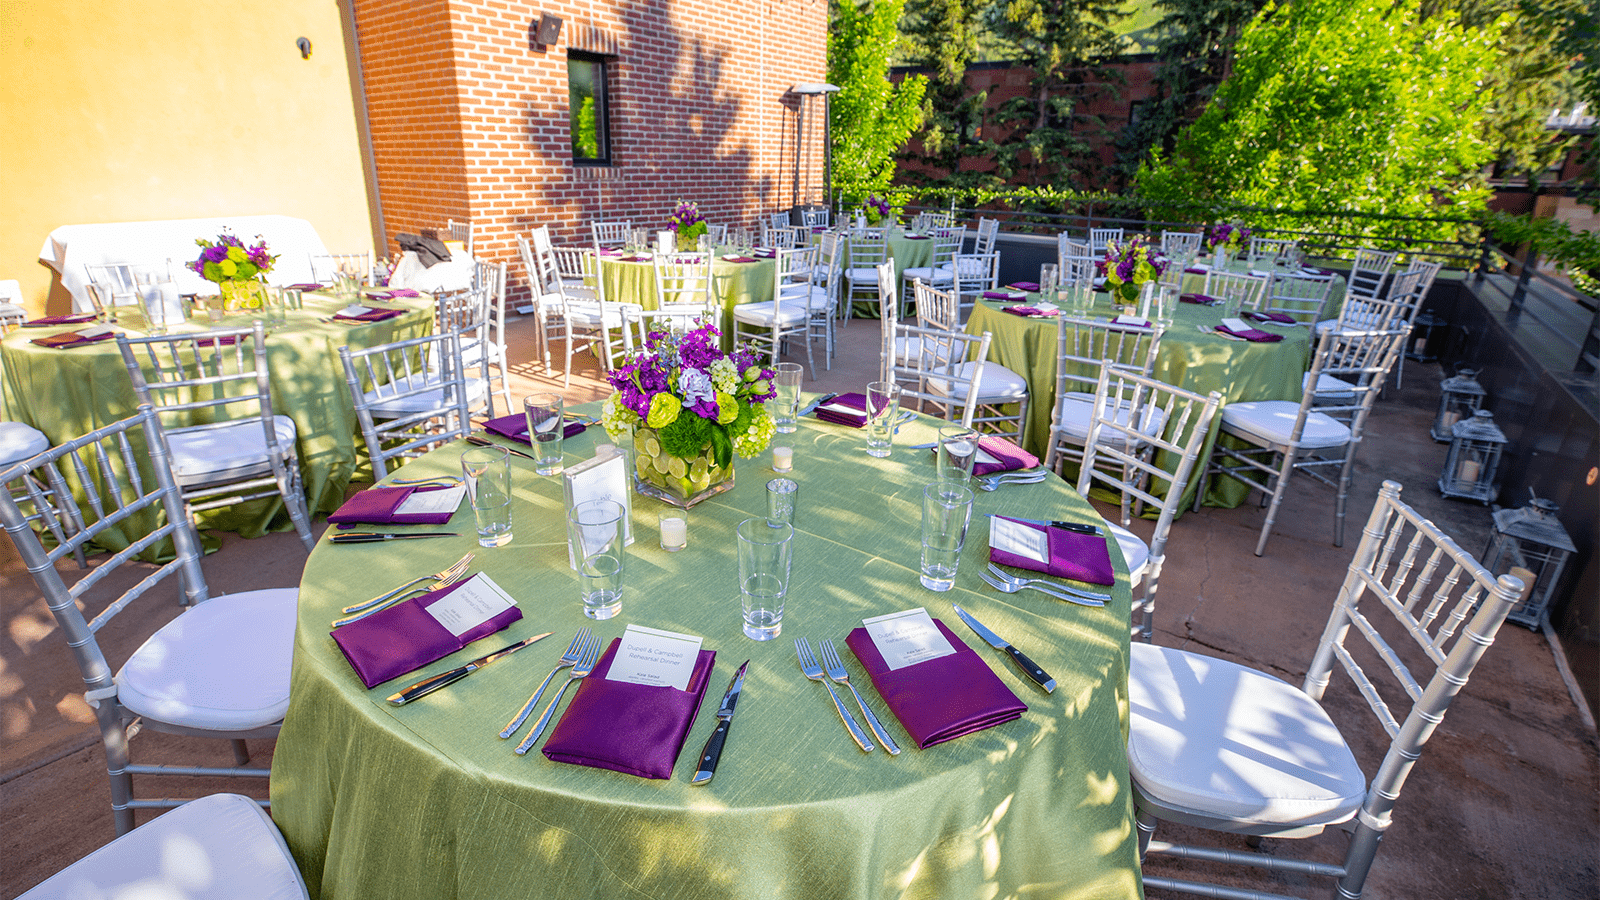 Reception dinner, green table cloth over circular tables in the shade on a wedding venue